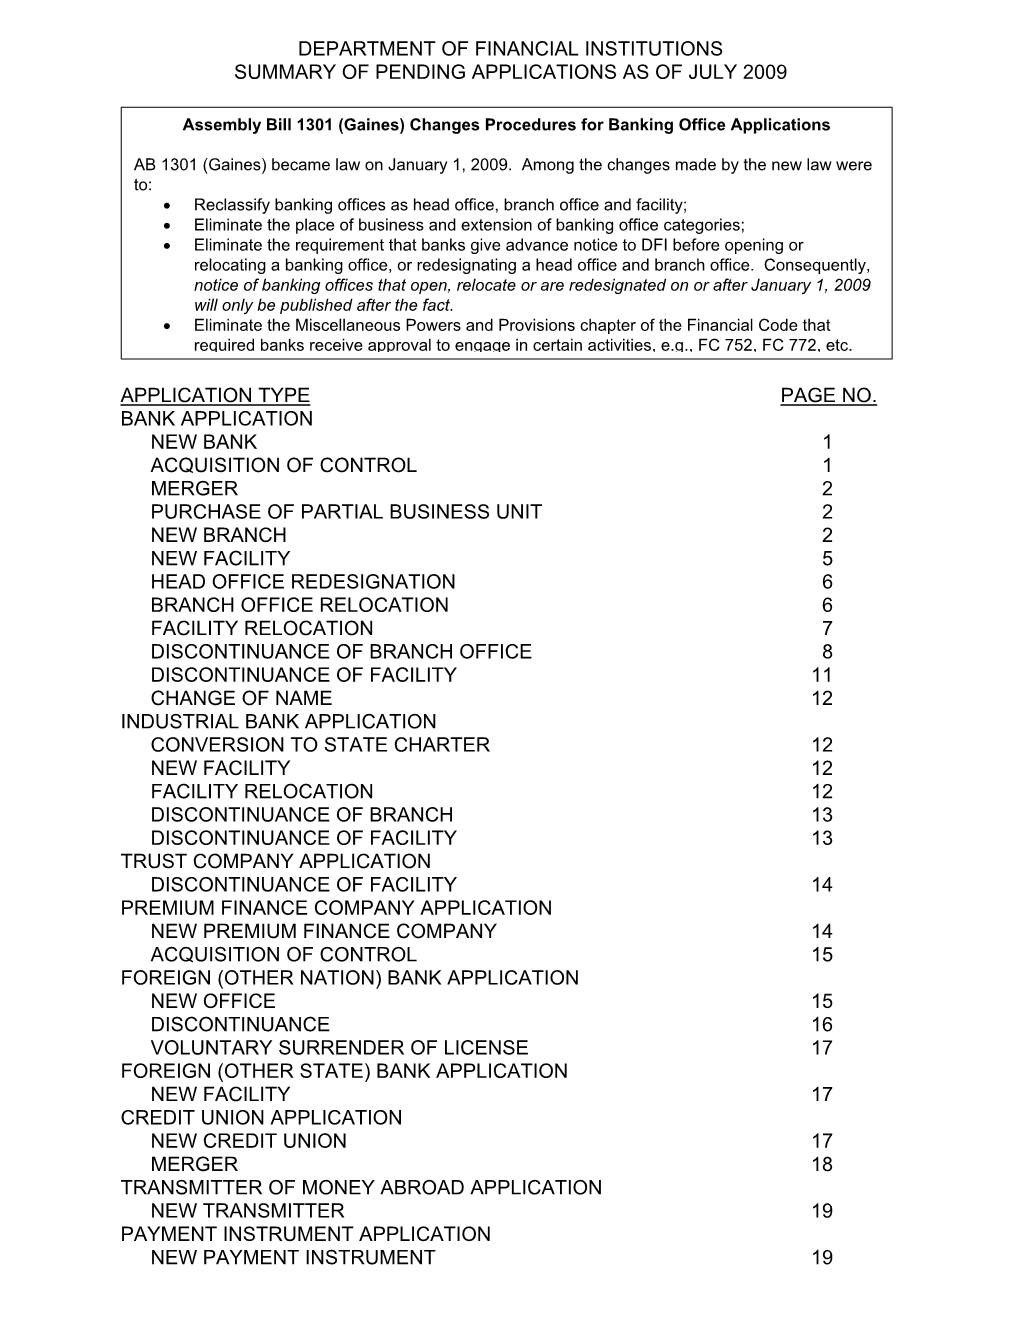 Department of Financial Institutions Summary of Pending Applications As of July 2009